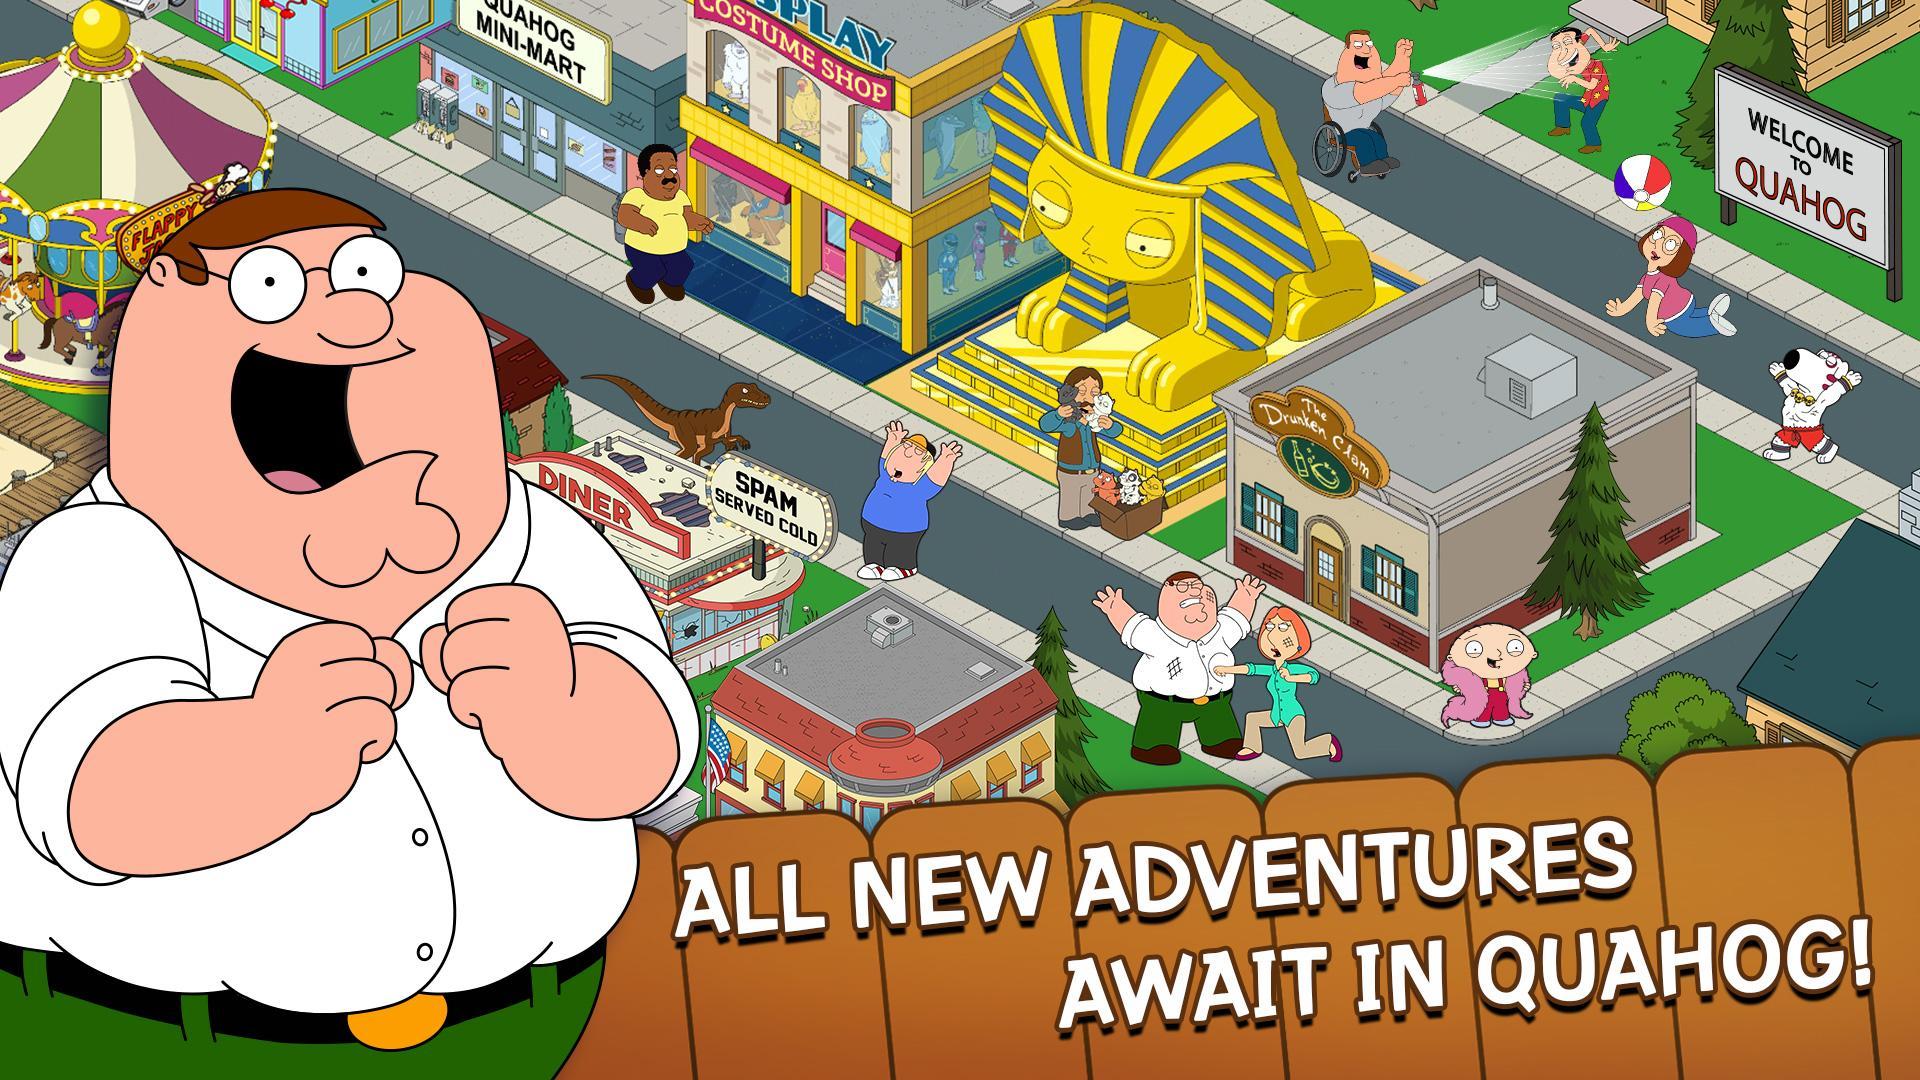 Family Guy The Quest for Stuff 3.8.1 Screenshot 1